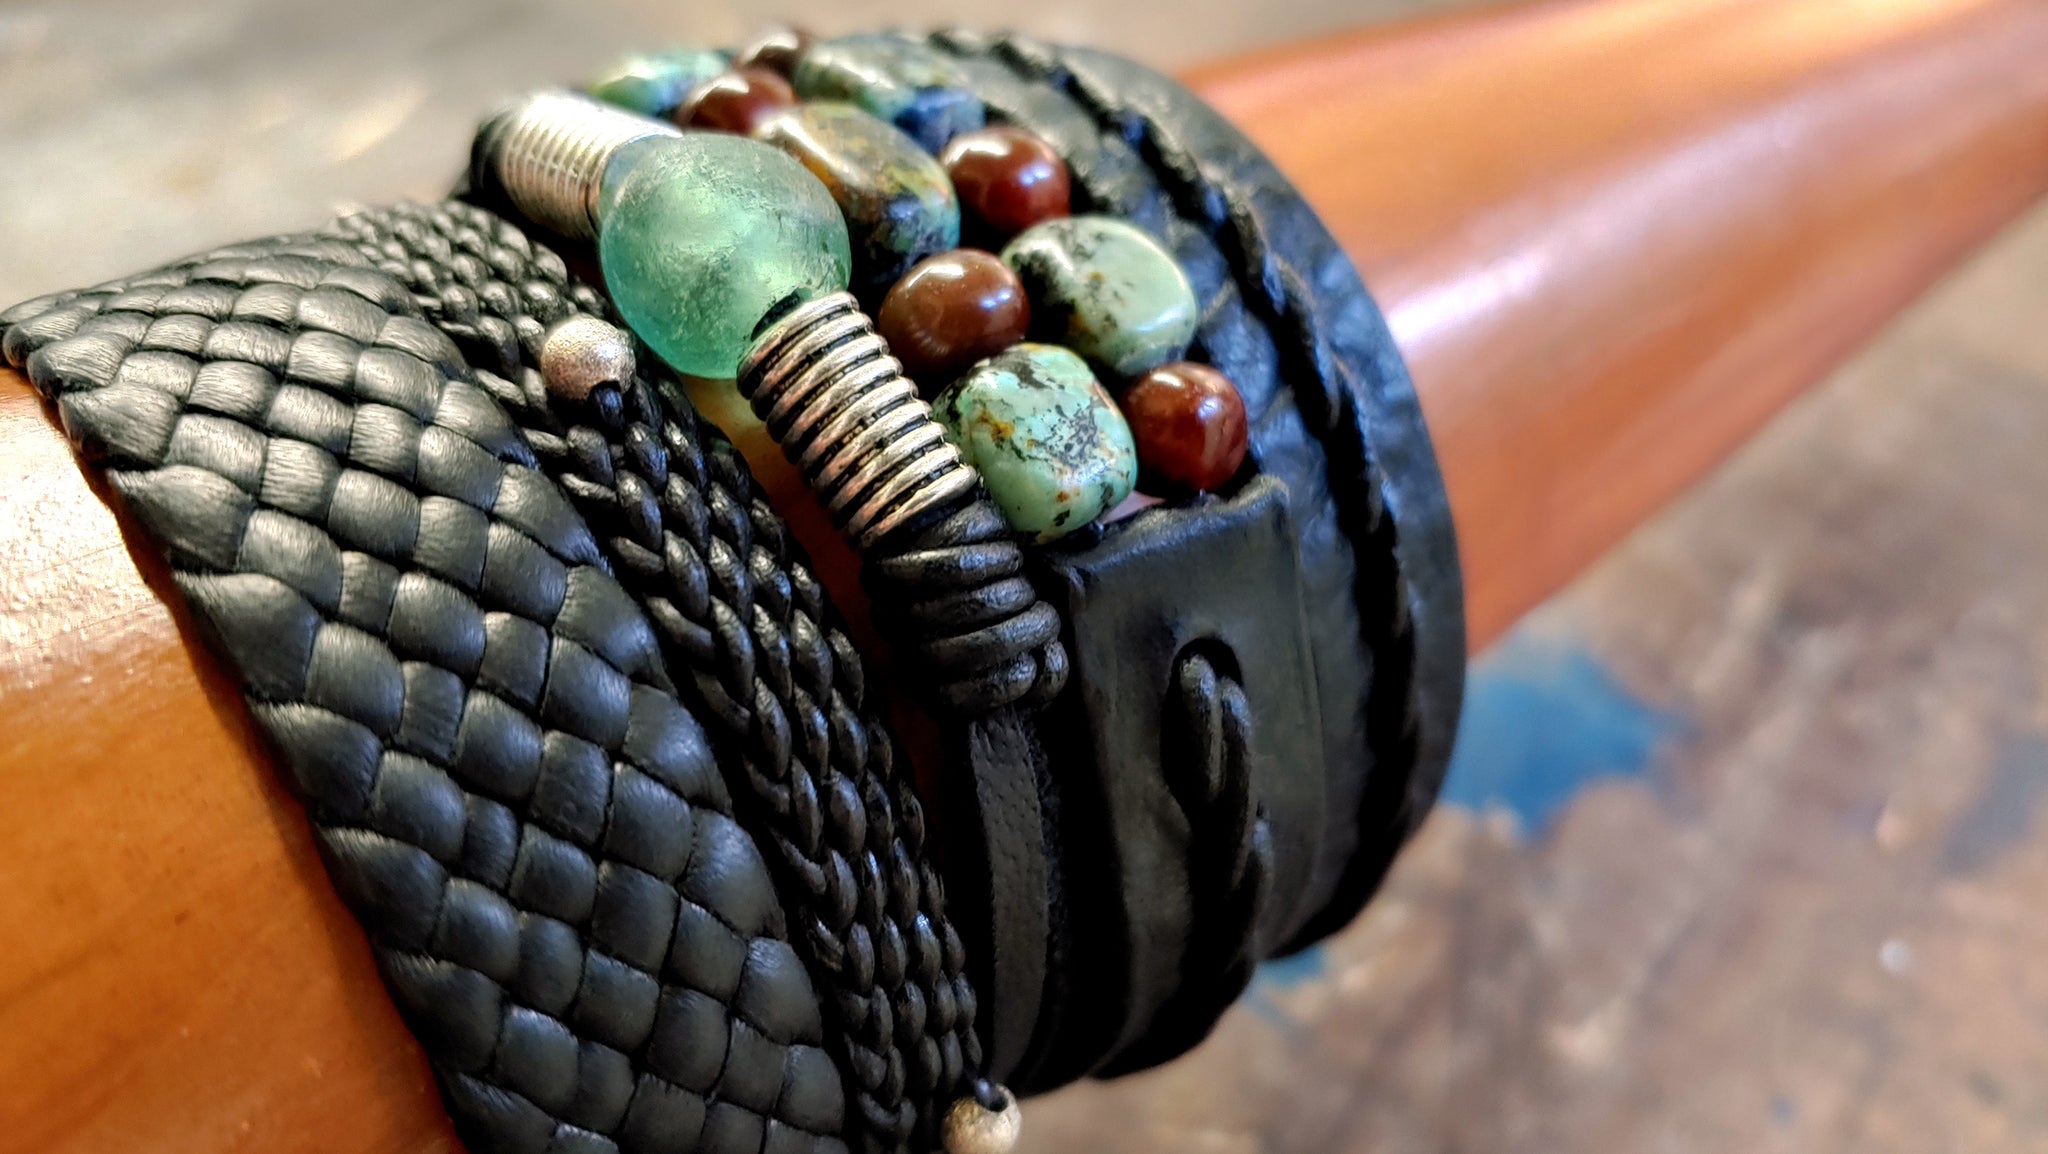 Tano - 5 leather bracelet set, African Turquoise, Red Carnelian, African Glass, Braided Leather, Beaded - All Black Leather Option